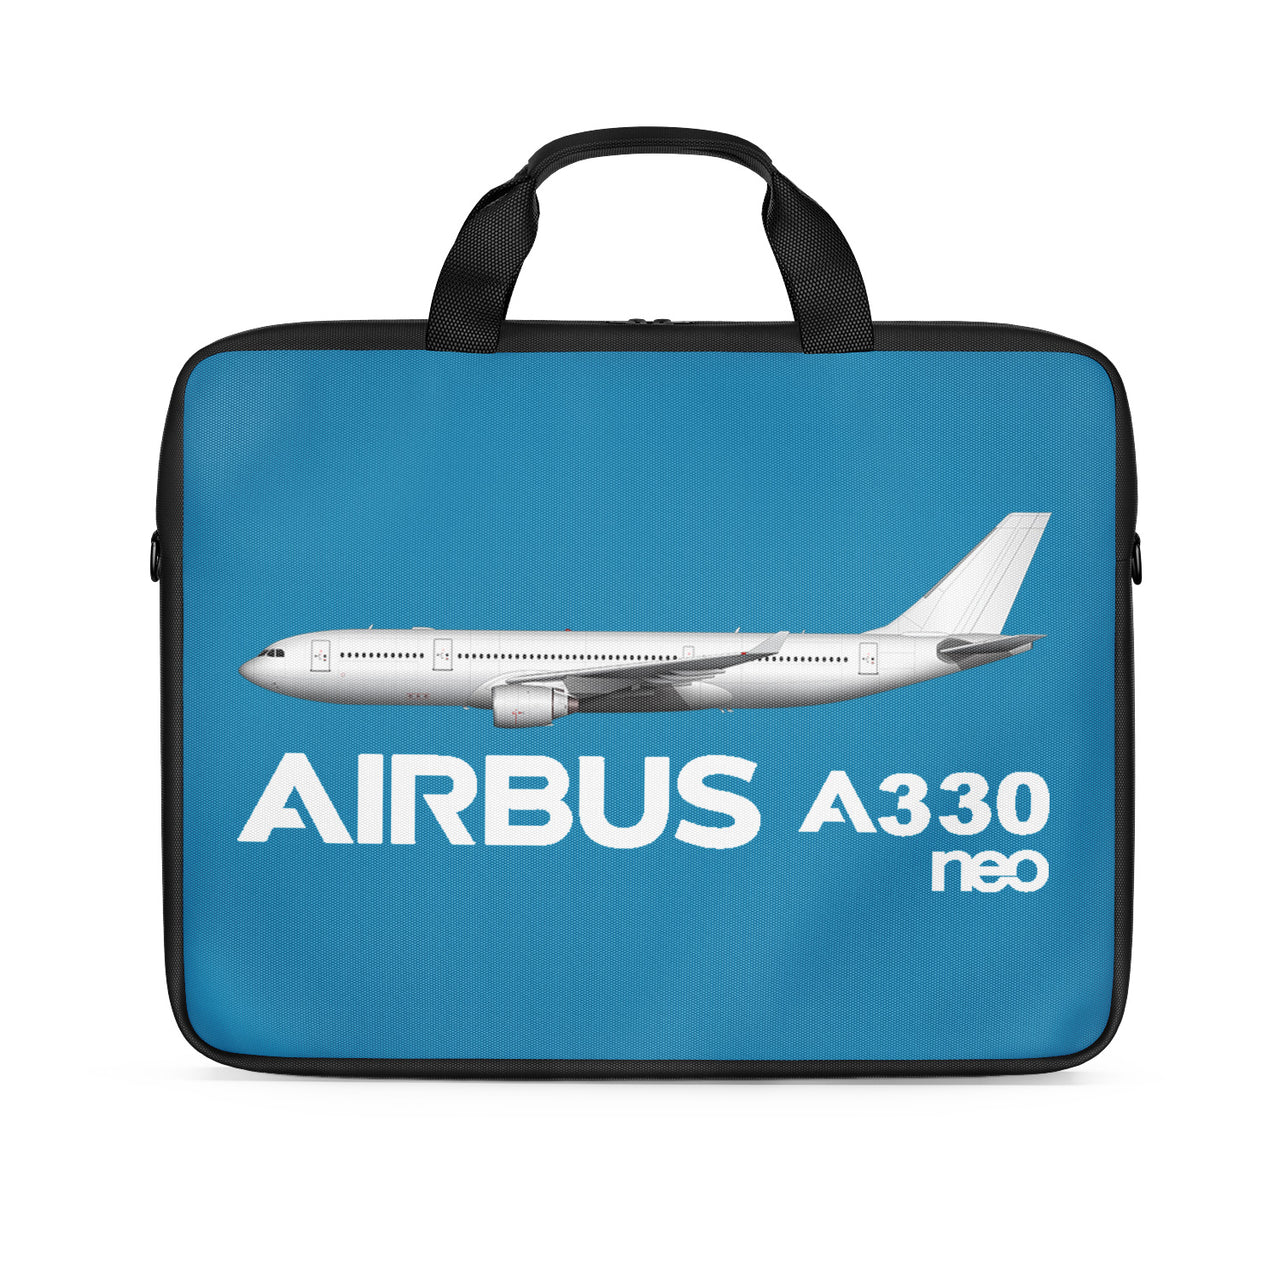 The Airbus A330neo Designed Laptop & Tablet Bags